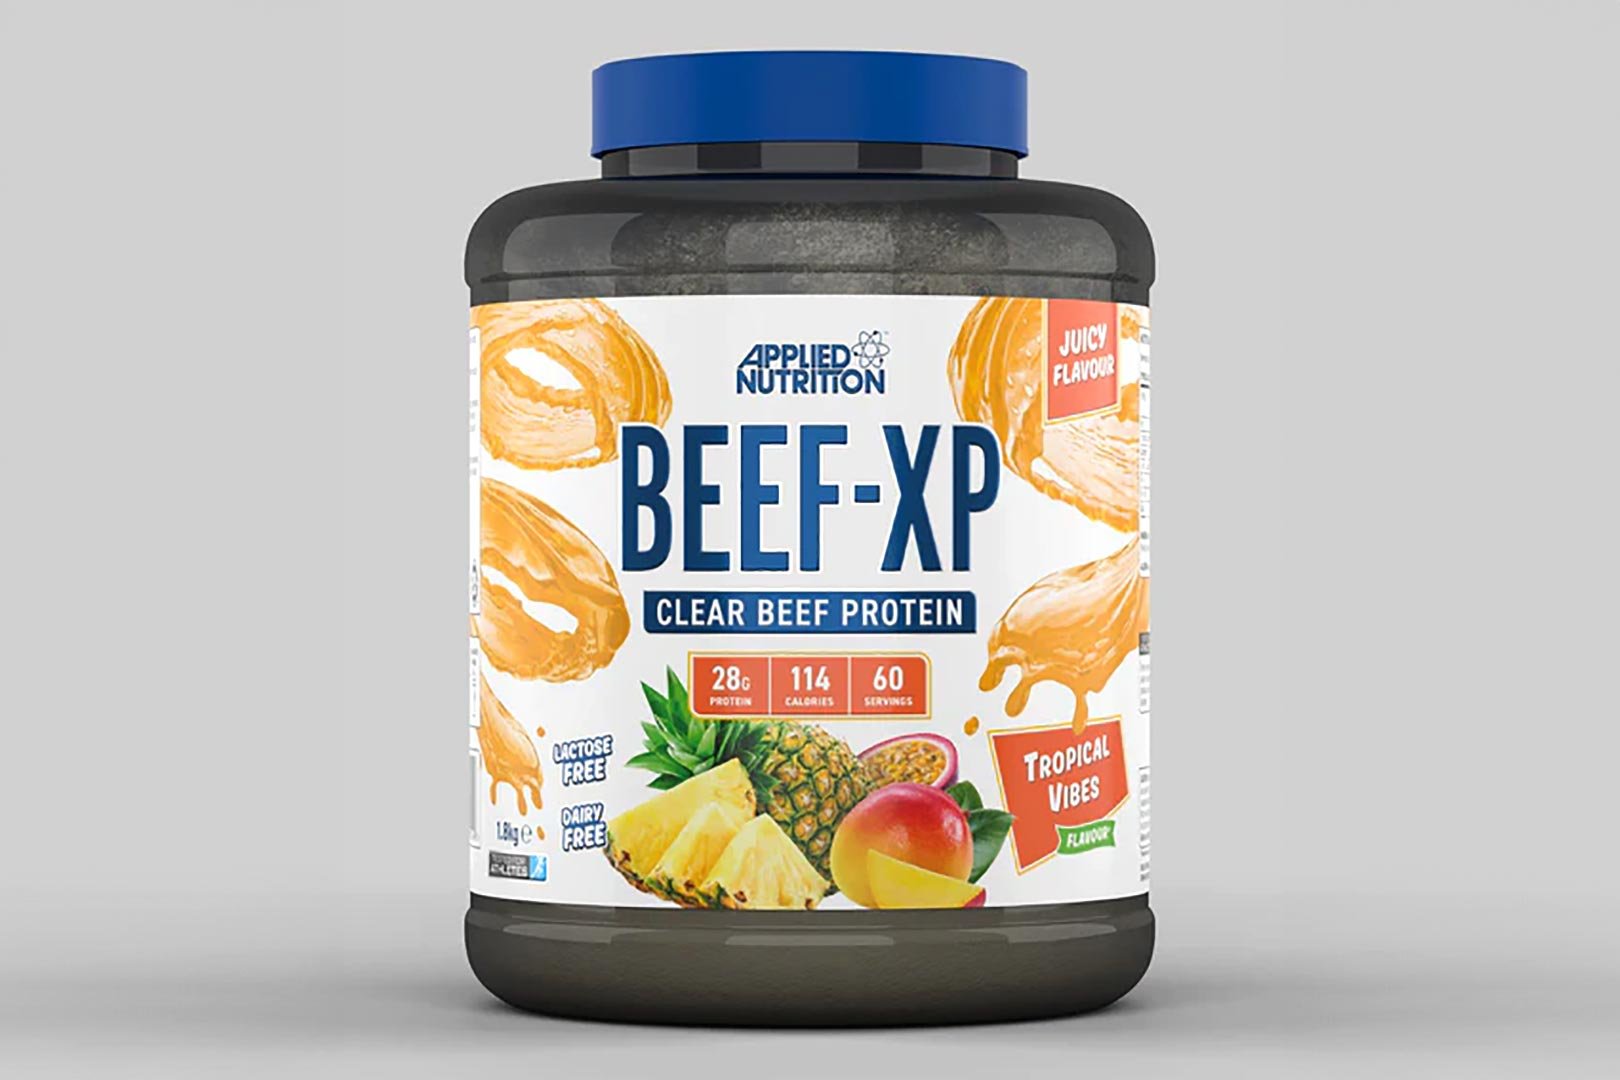 Applied Nutrition New And Improved Beef Xp